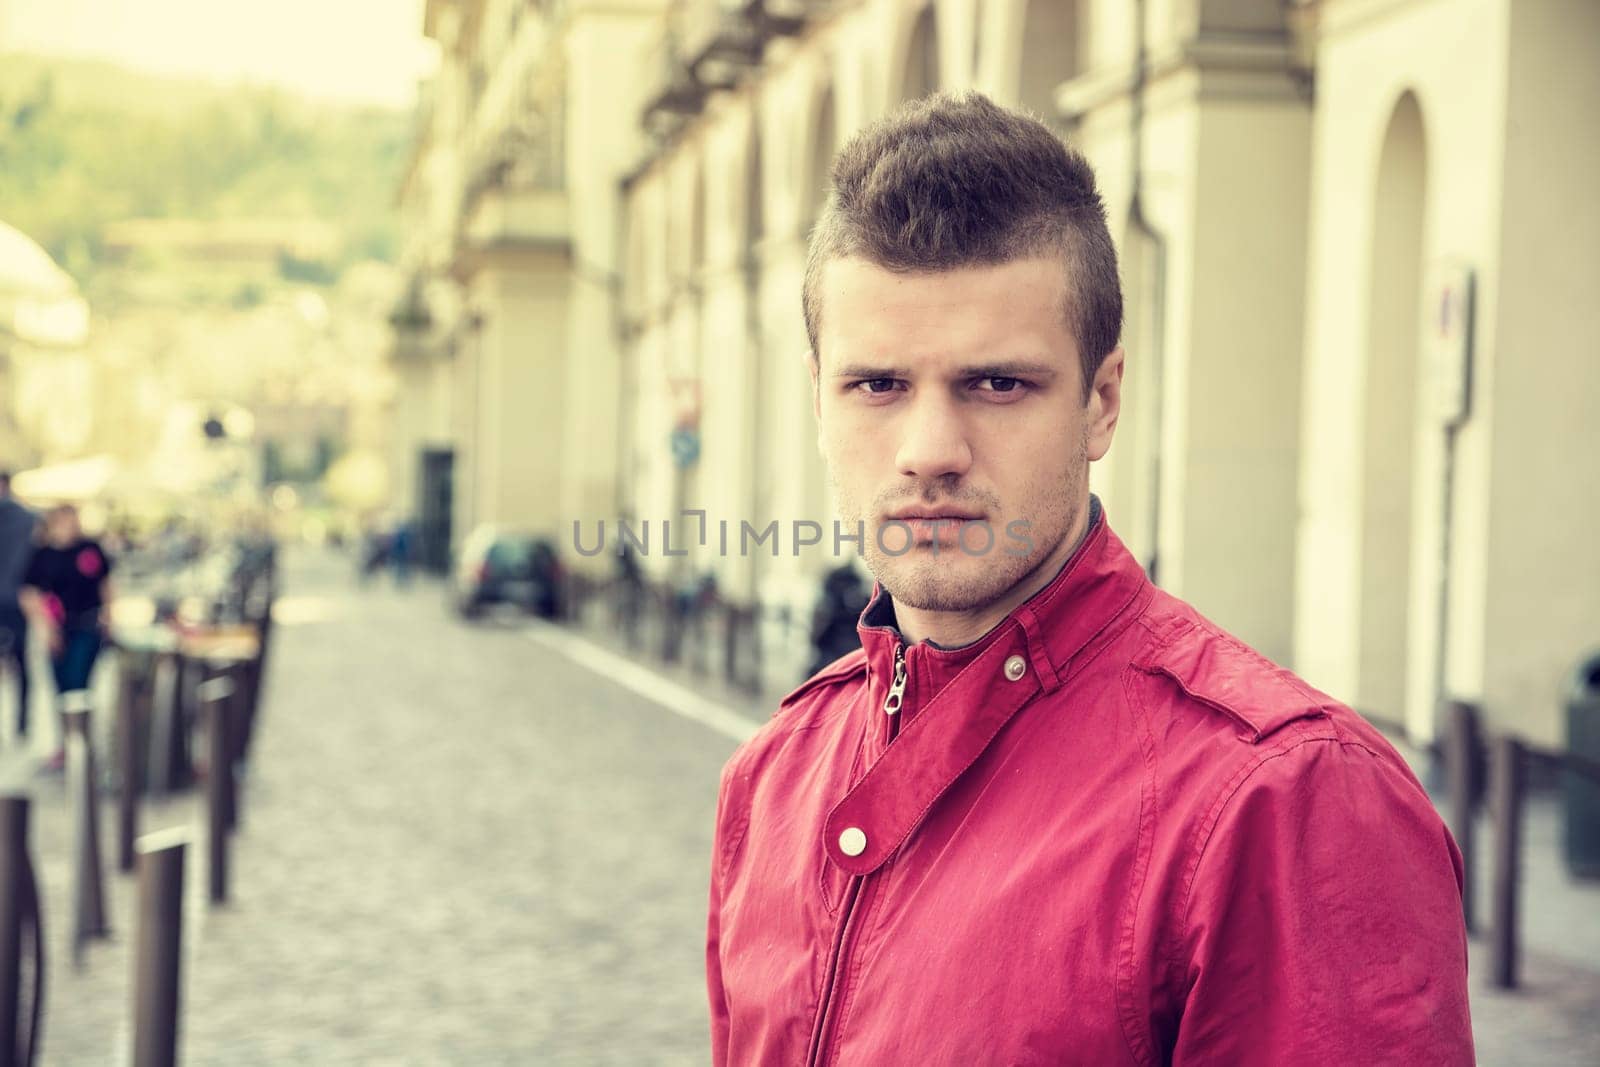 One handsome young man in urban setting in European city